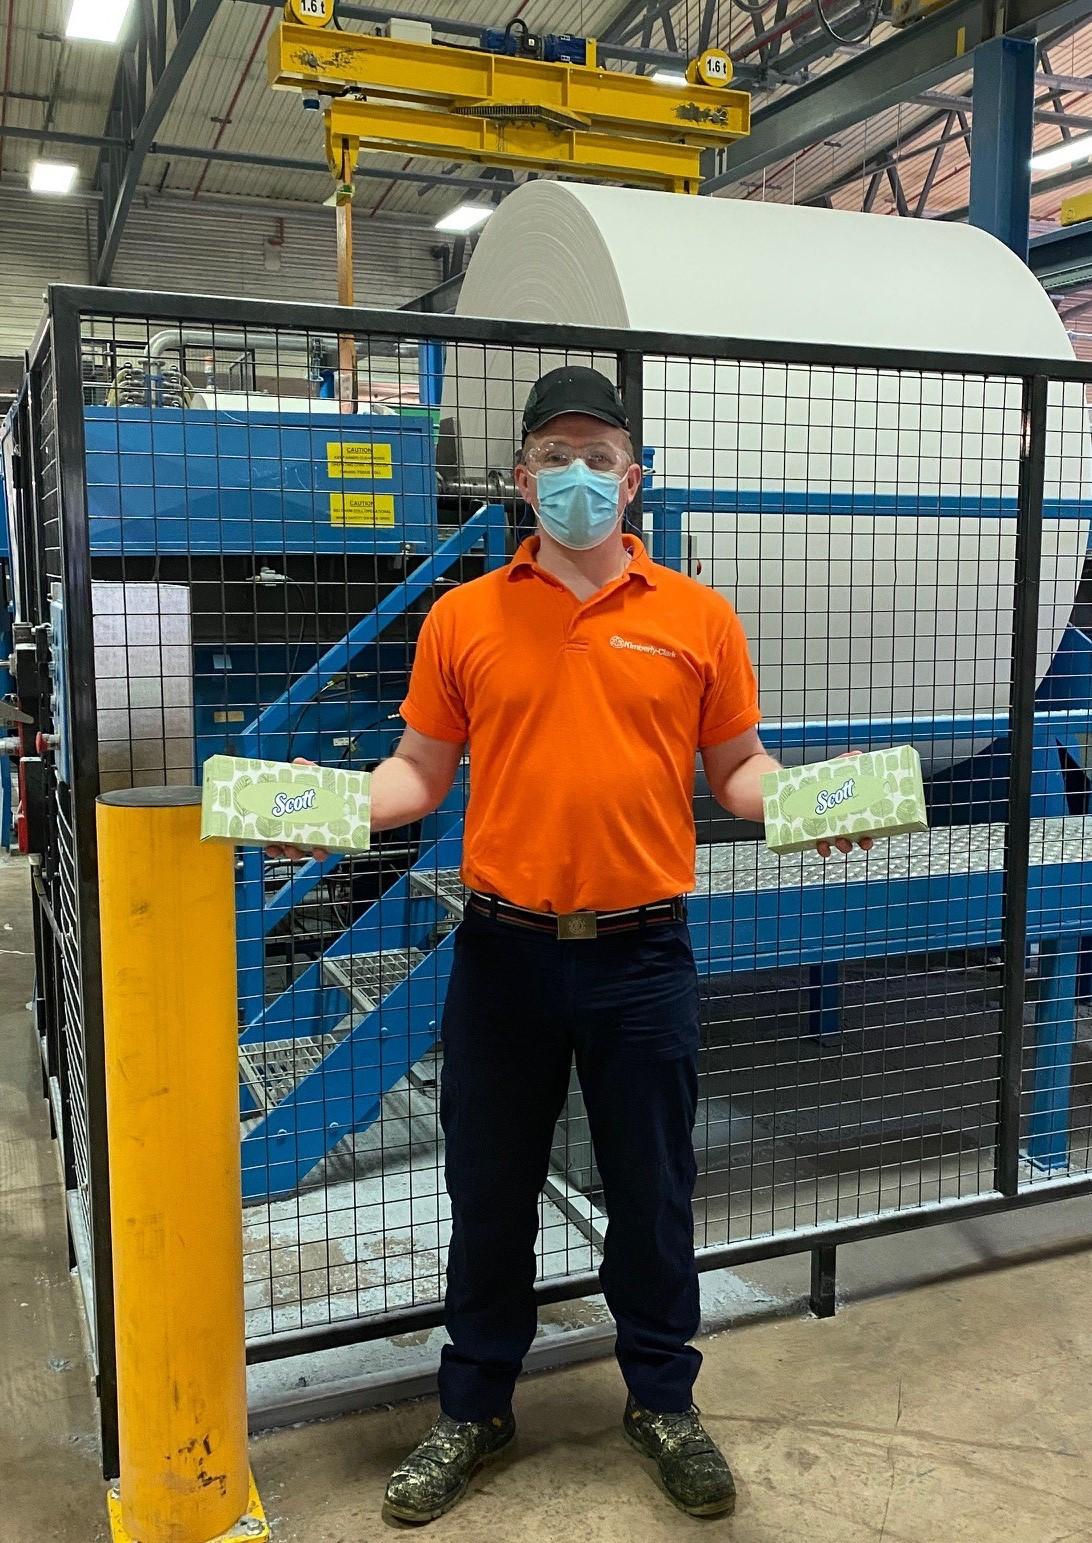 An employee holds Scott® tissues at Kimberly-Clark's Flint manufacturing facility in the UK.